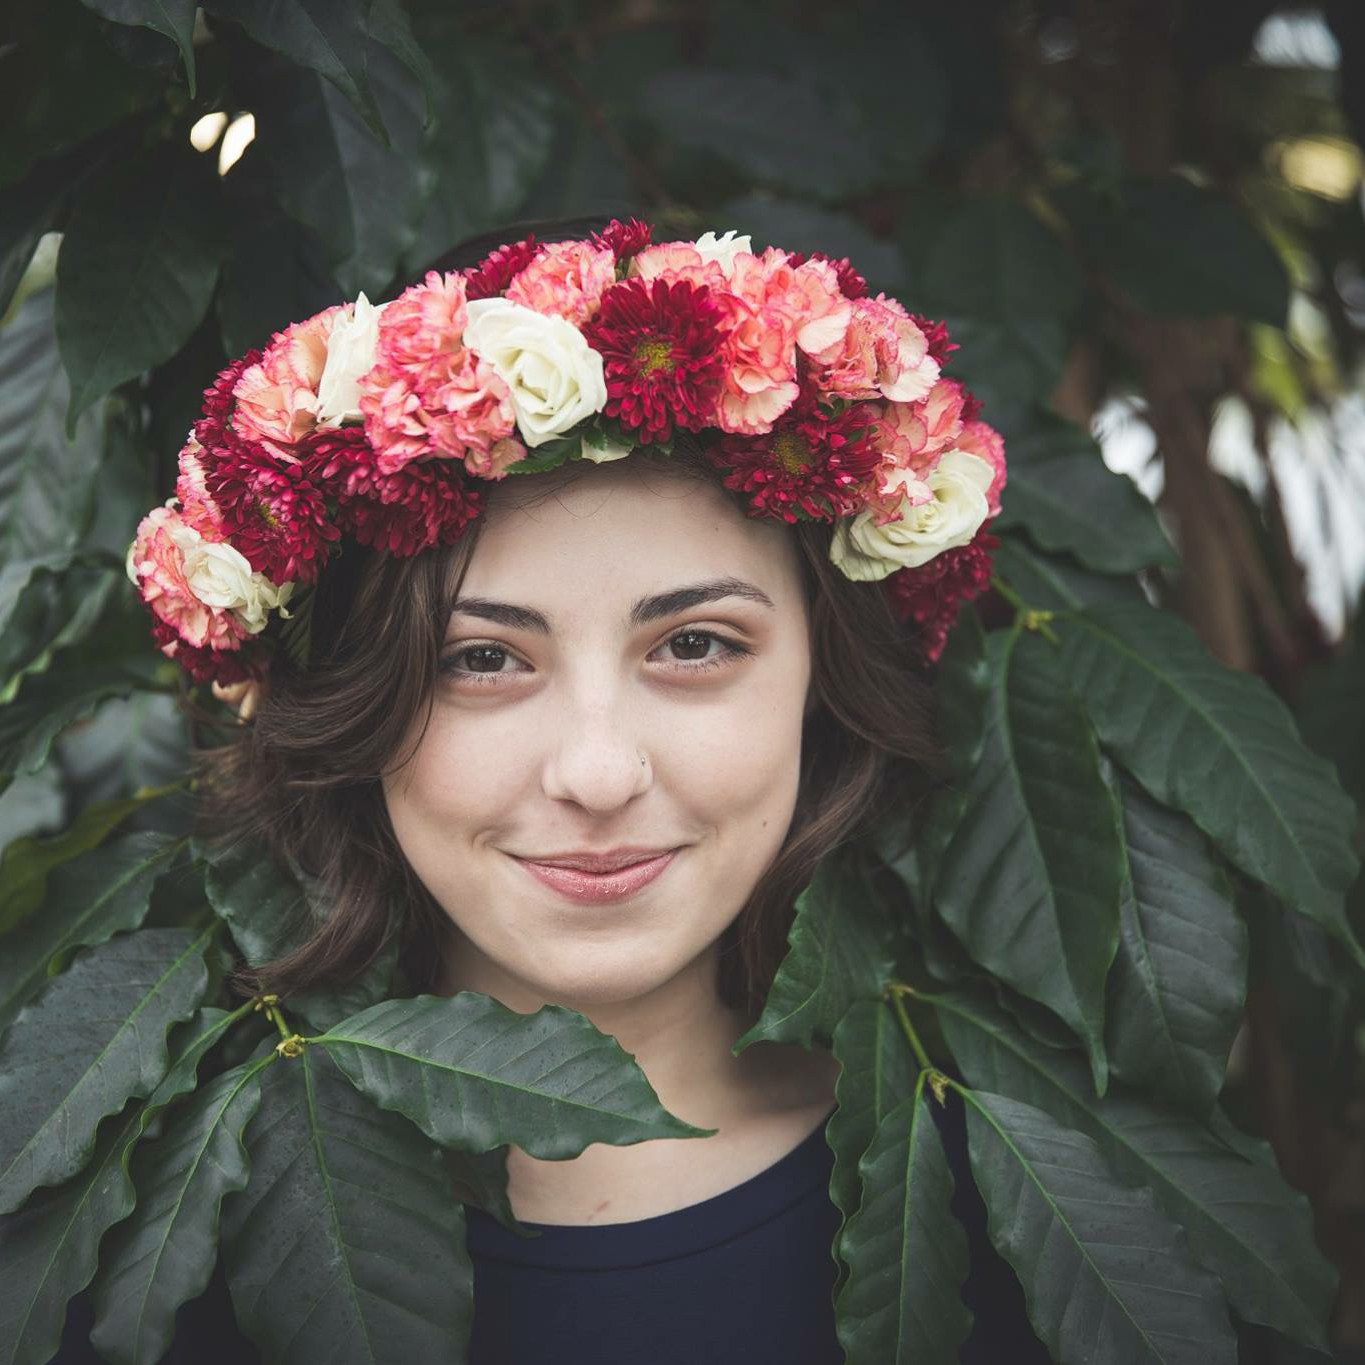 Flower crown by Natasha Price of Paper Peony Alaska and photo by Cleo Jane Photography